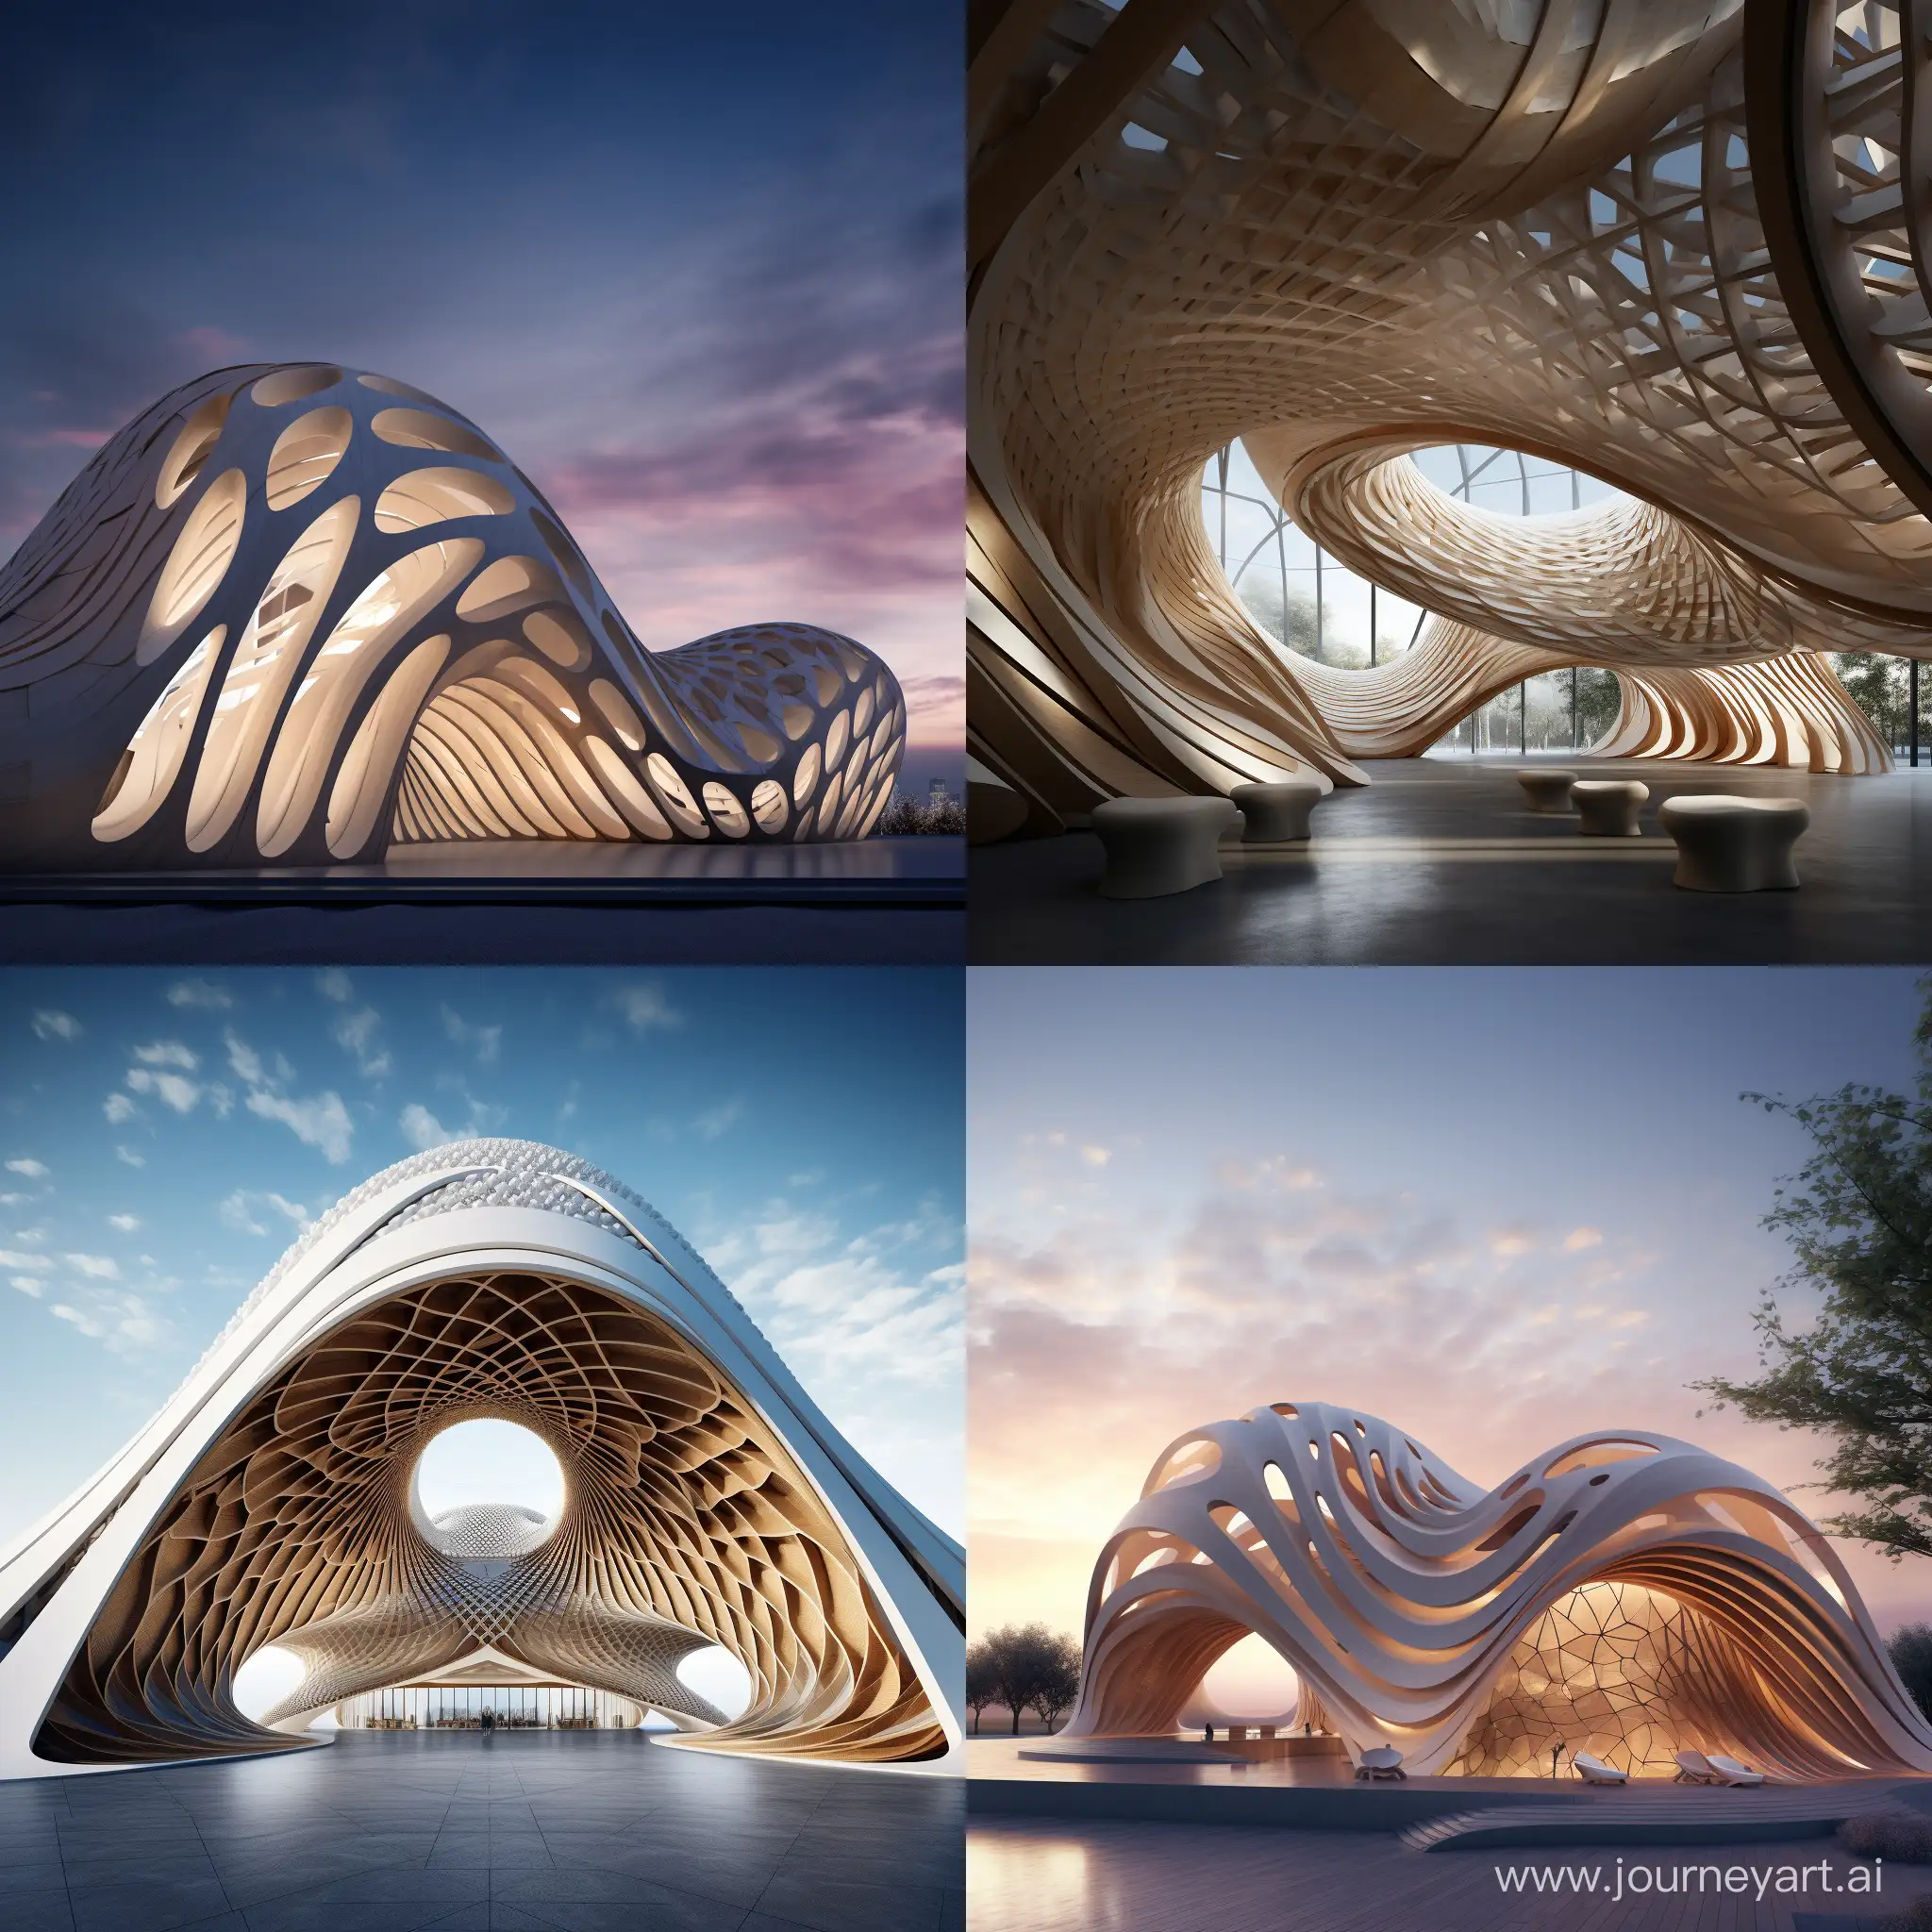 Parametric Design in Architecture:
Explore the use of parametric design to create dynamic and adaptive architectural forms that respond to environmental factors and user needs.